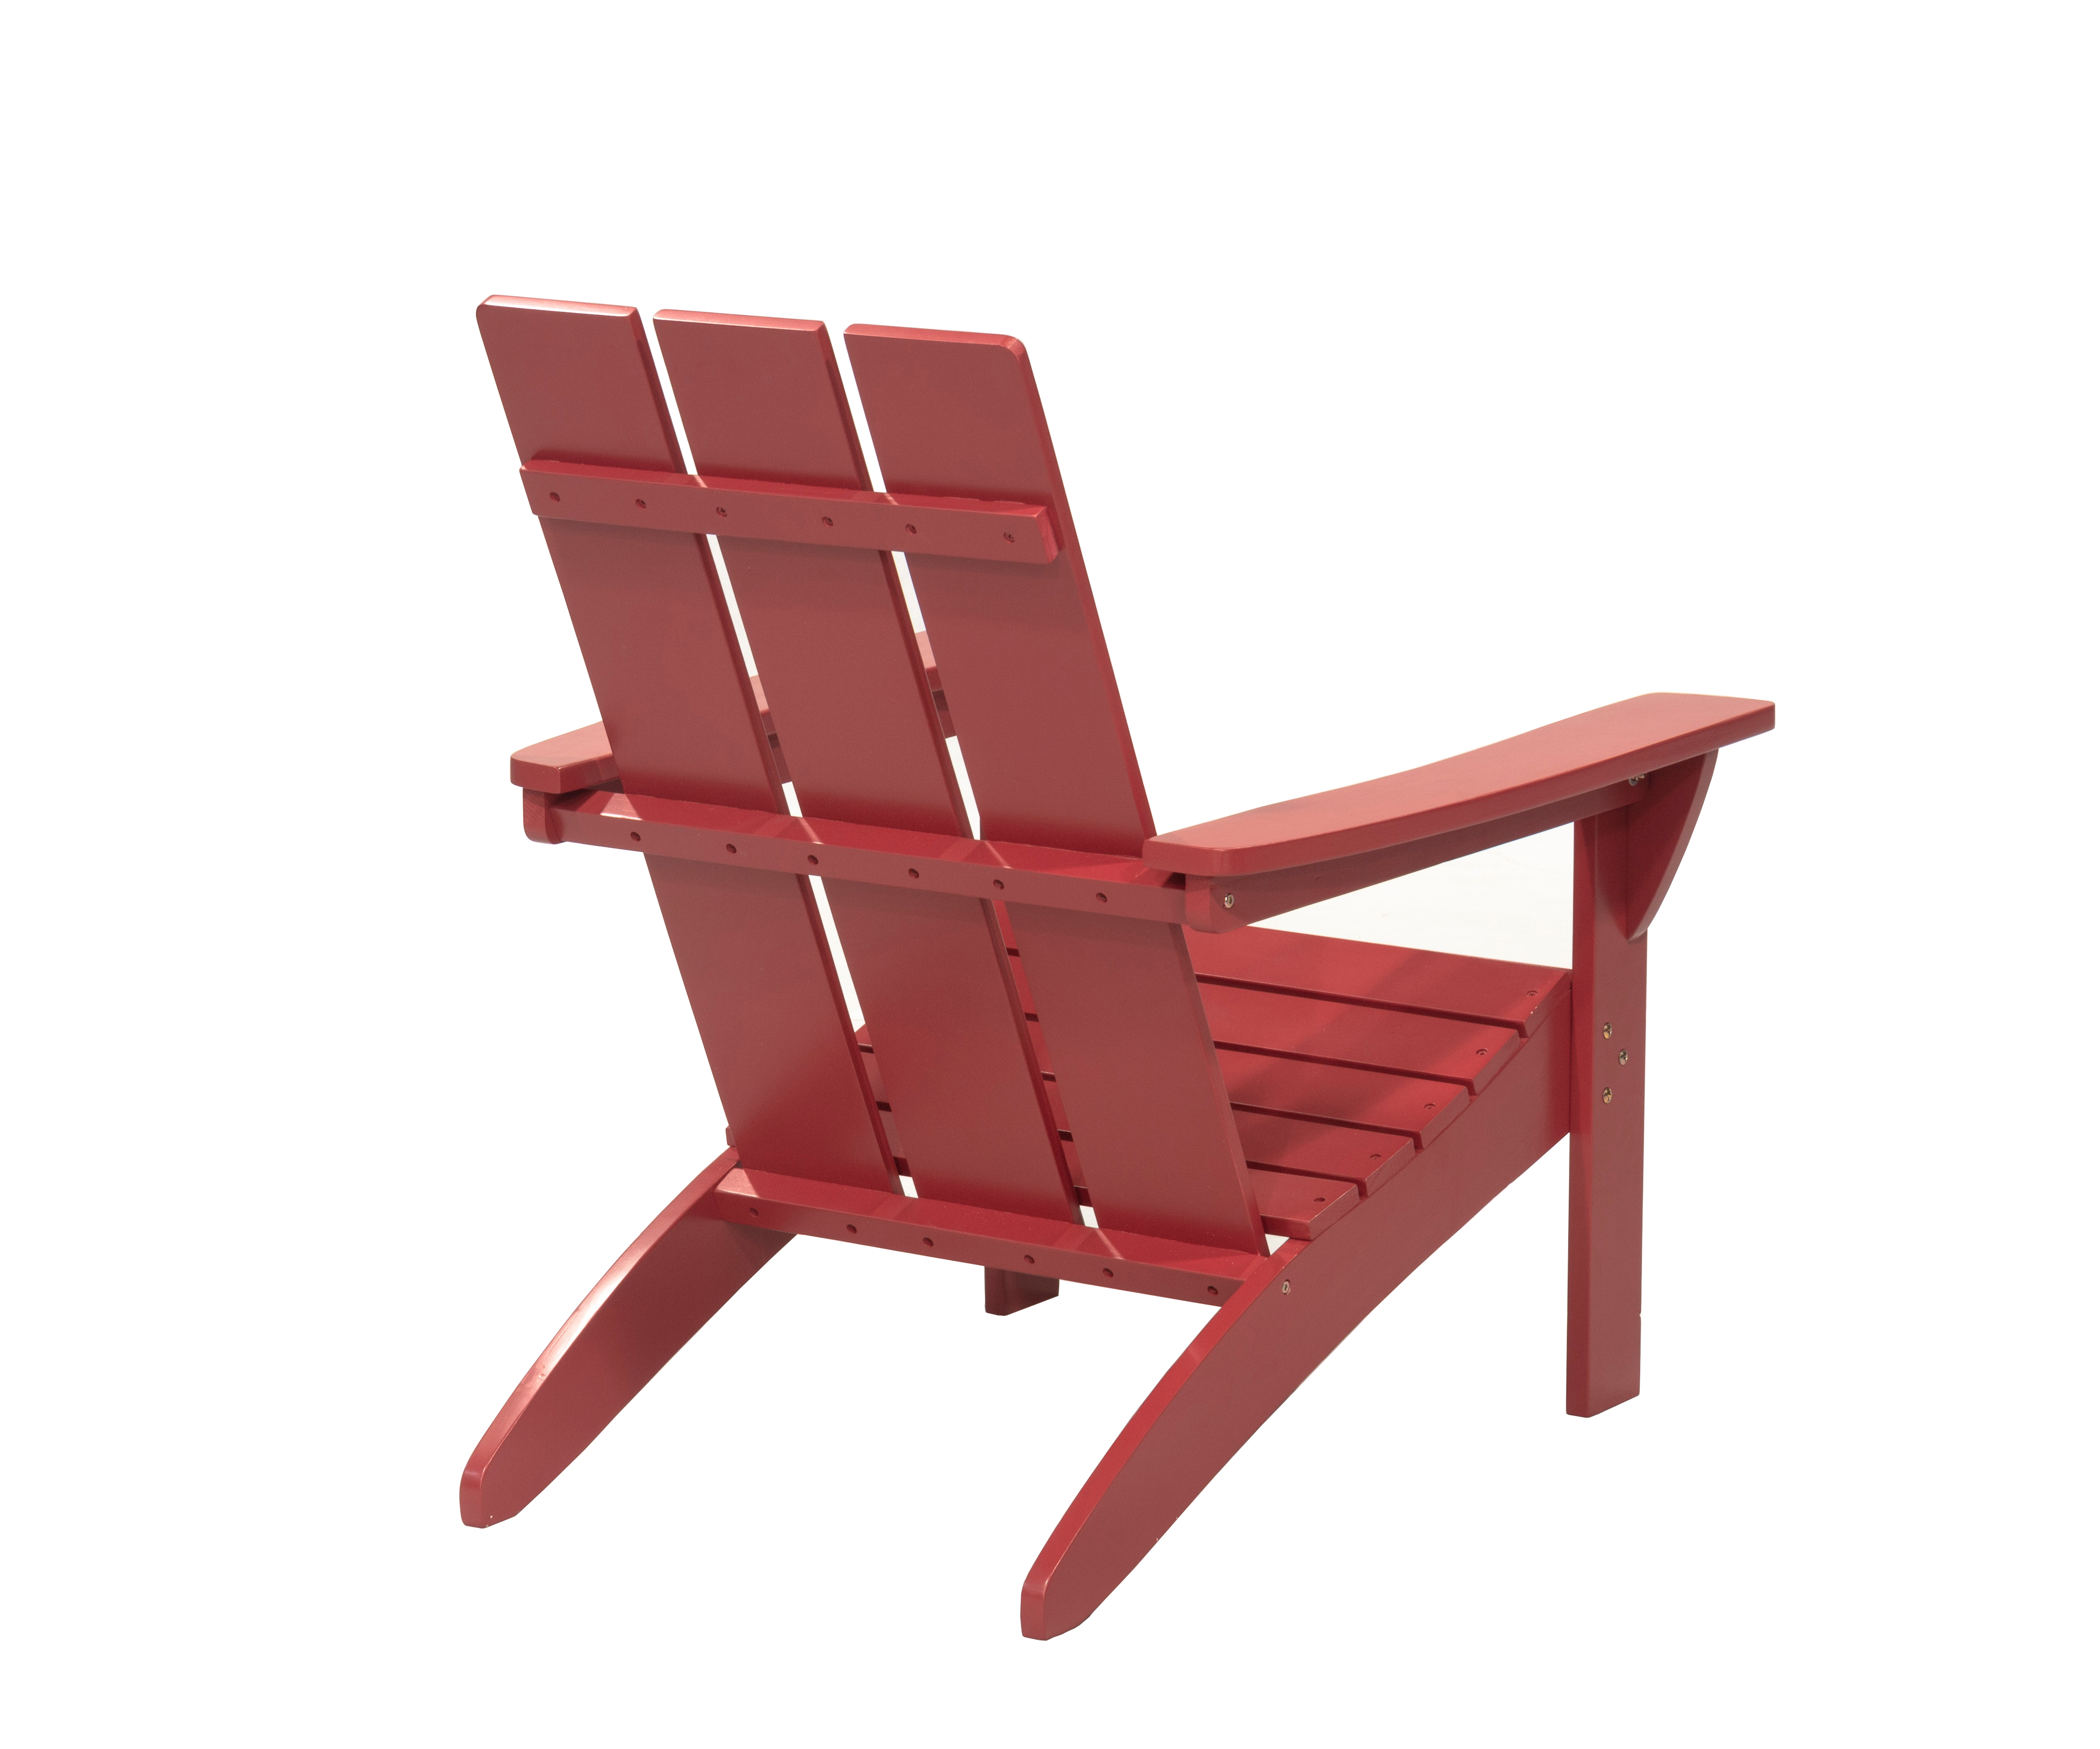 Outdoor Patio Garden Furniture 3-Piece Wood Adirondack Chair Set, Weather Resistant Finish,2 Adirondack Chairs and 1 Side Table-Red - image 3 of 11